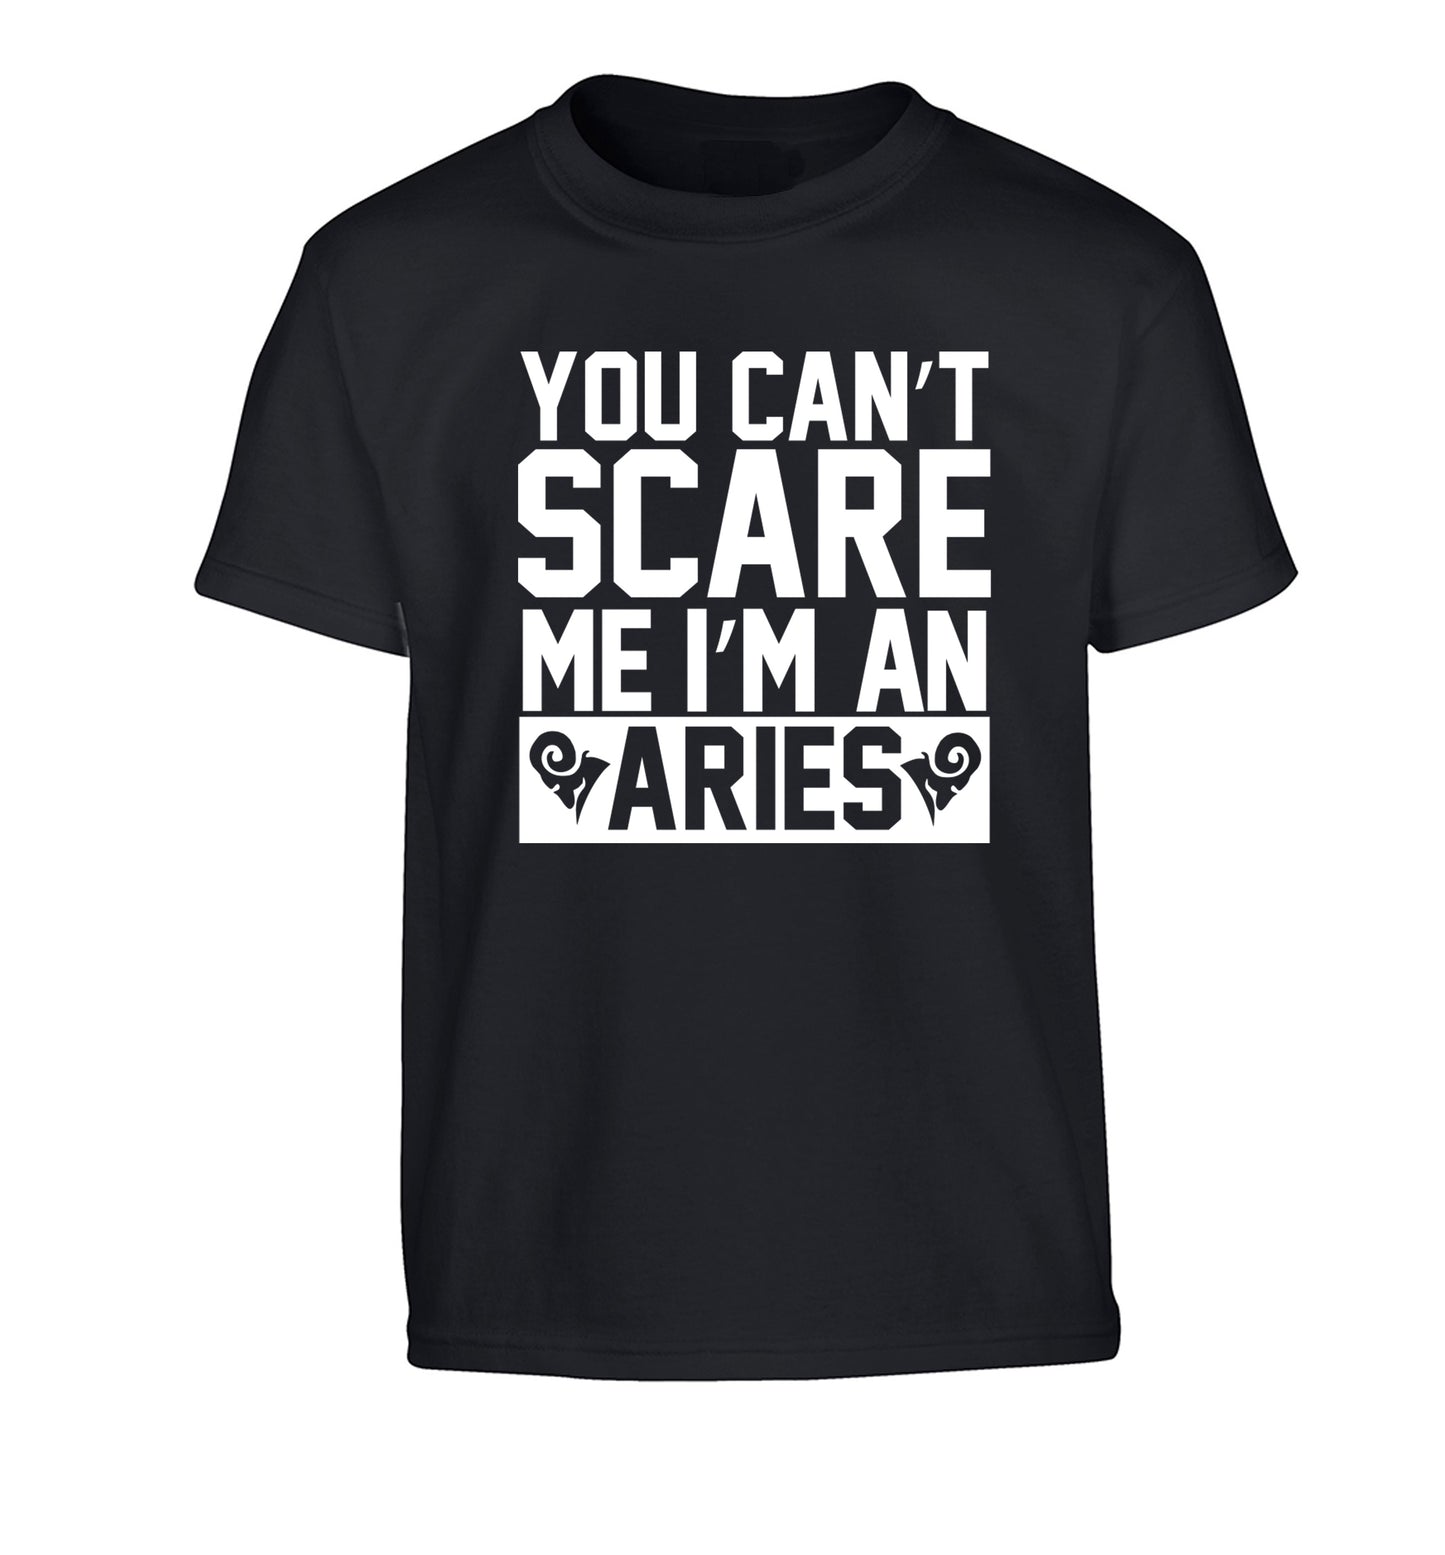 You can't scare me I'm an aries Children's black Tshirt 12-13 Years